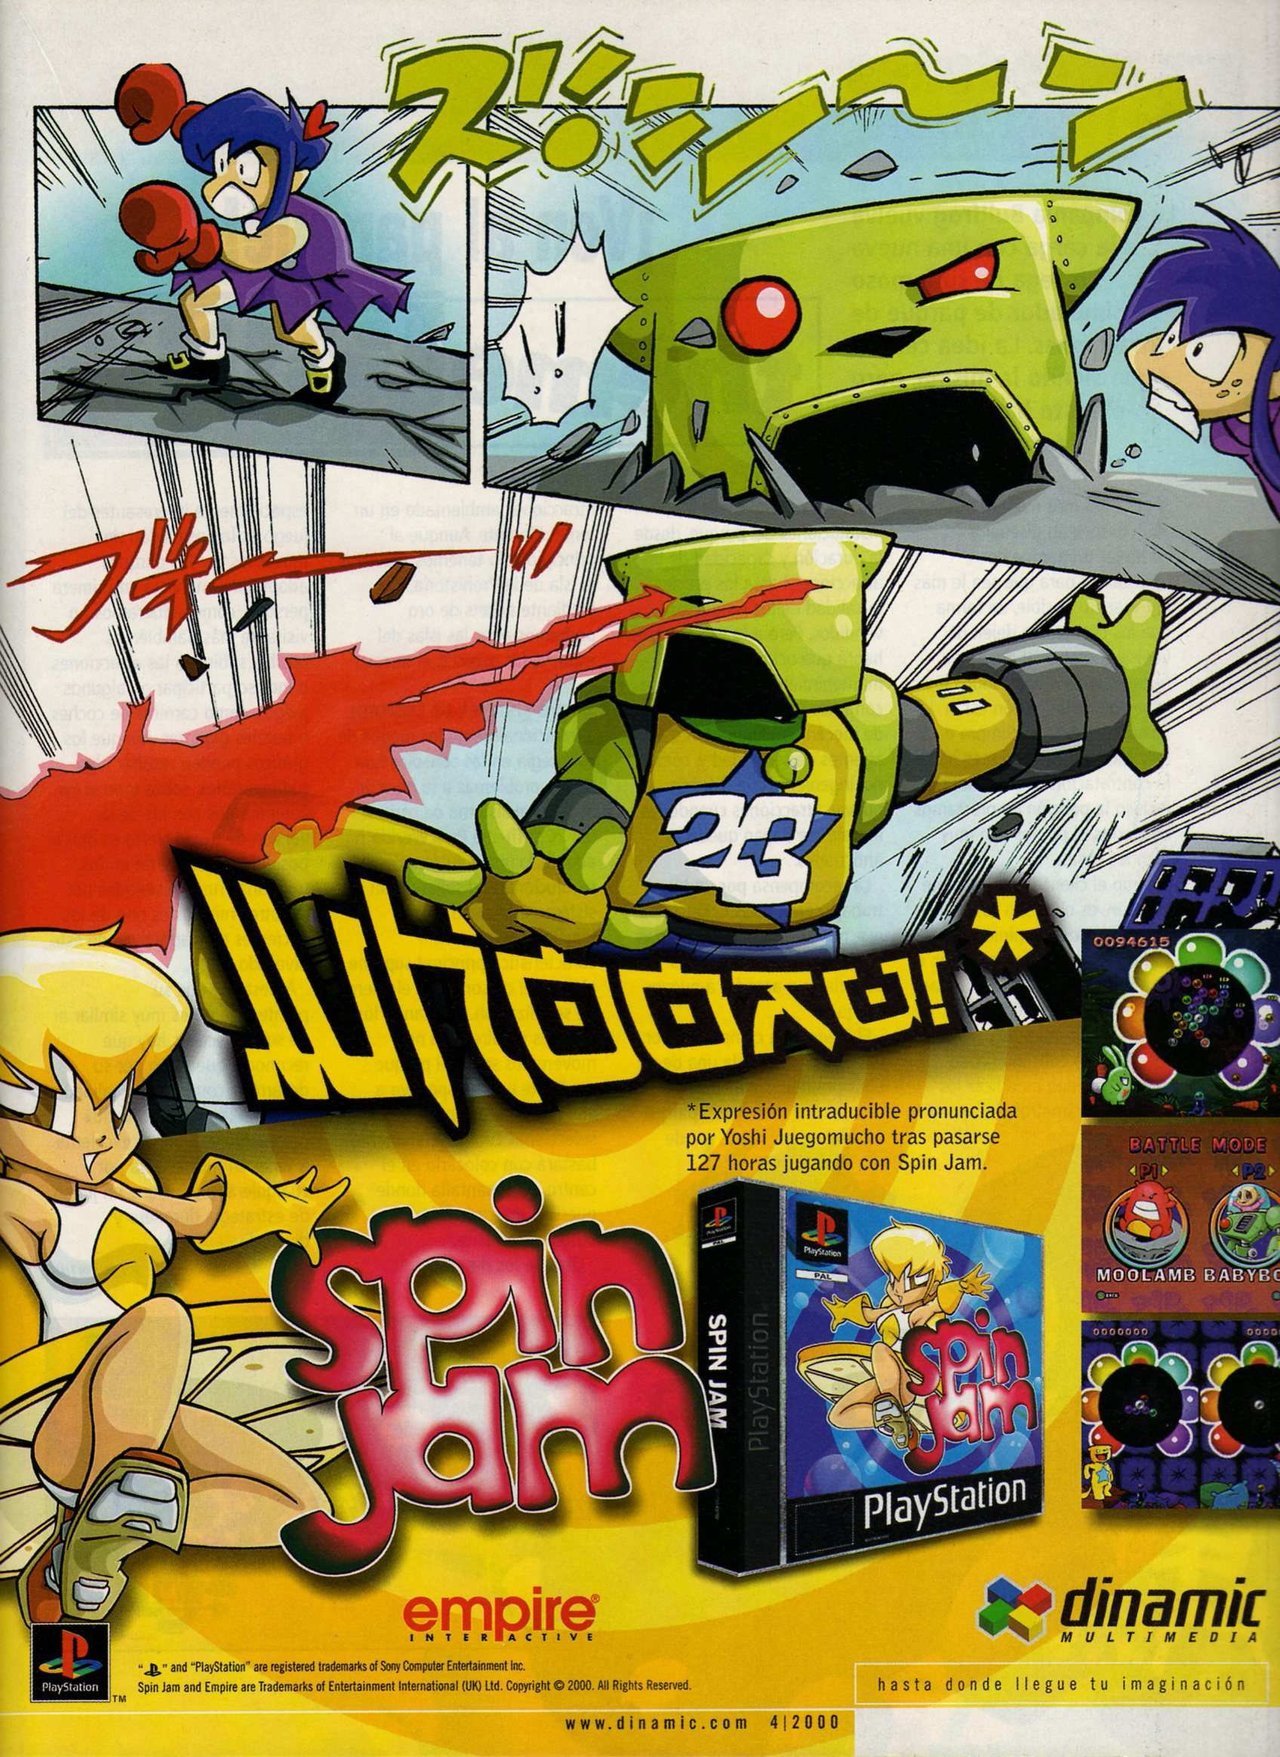 ‘Spin Jam’[PS1] [SPAIN] [MAGAZINE] [2000]
• via the PlayStation DataCenter
• Ah, the awkward middle years of western anime styles. You know, I actually had that one Scholastic How to Draw Manga book that we all like to cringe about now…